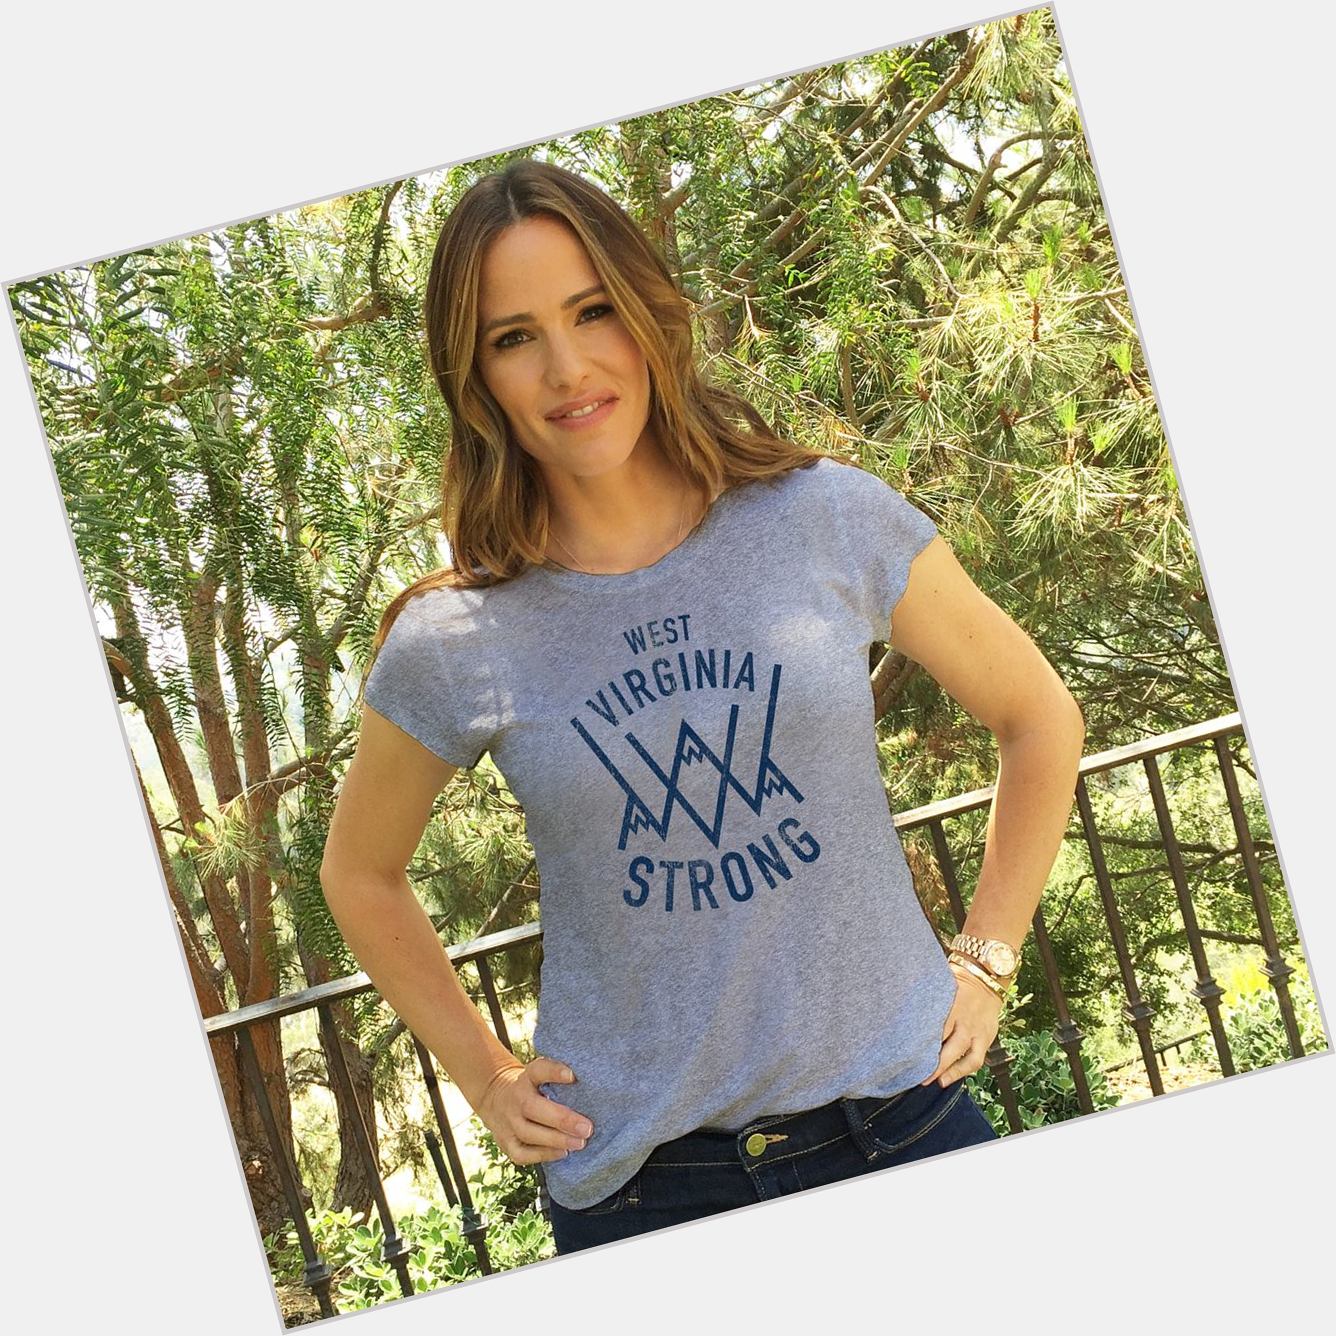 Happy birthday to Jennifer Garner! Thanks for supporting Save the Children & sporting the West Virginia Strong tee. 